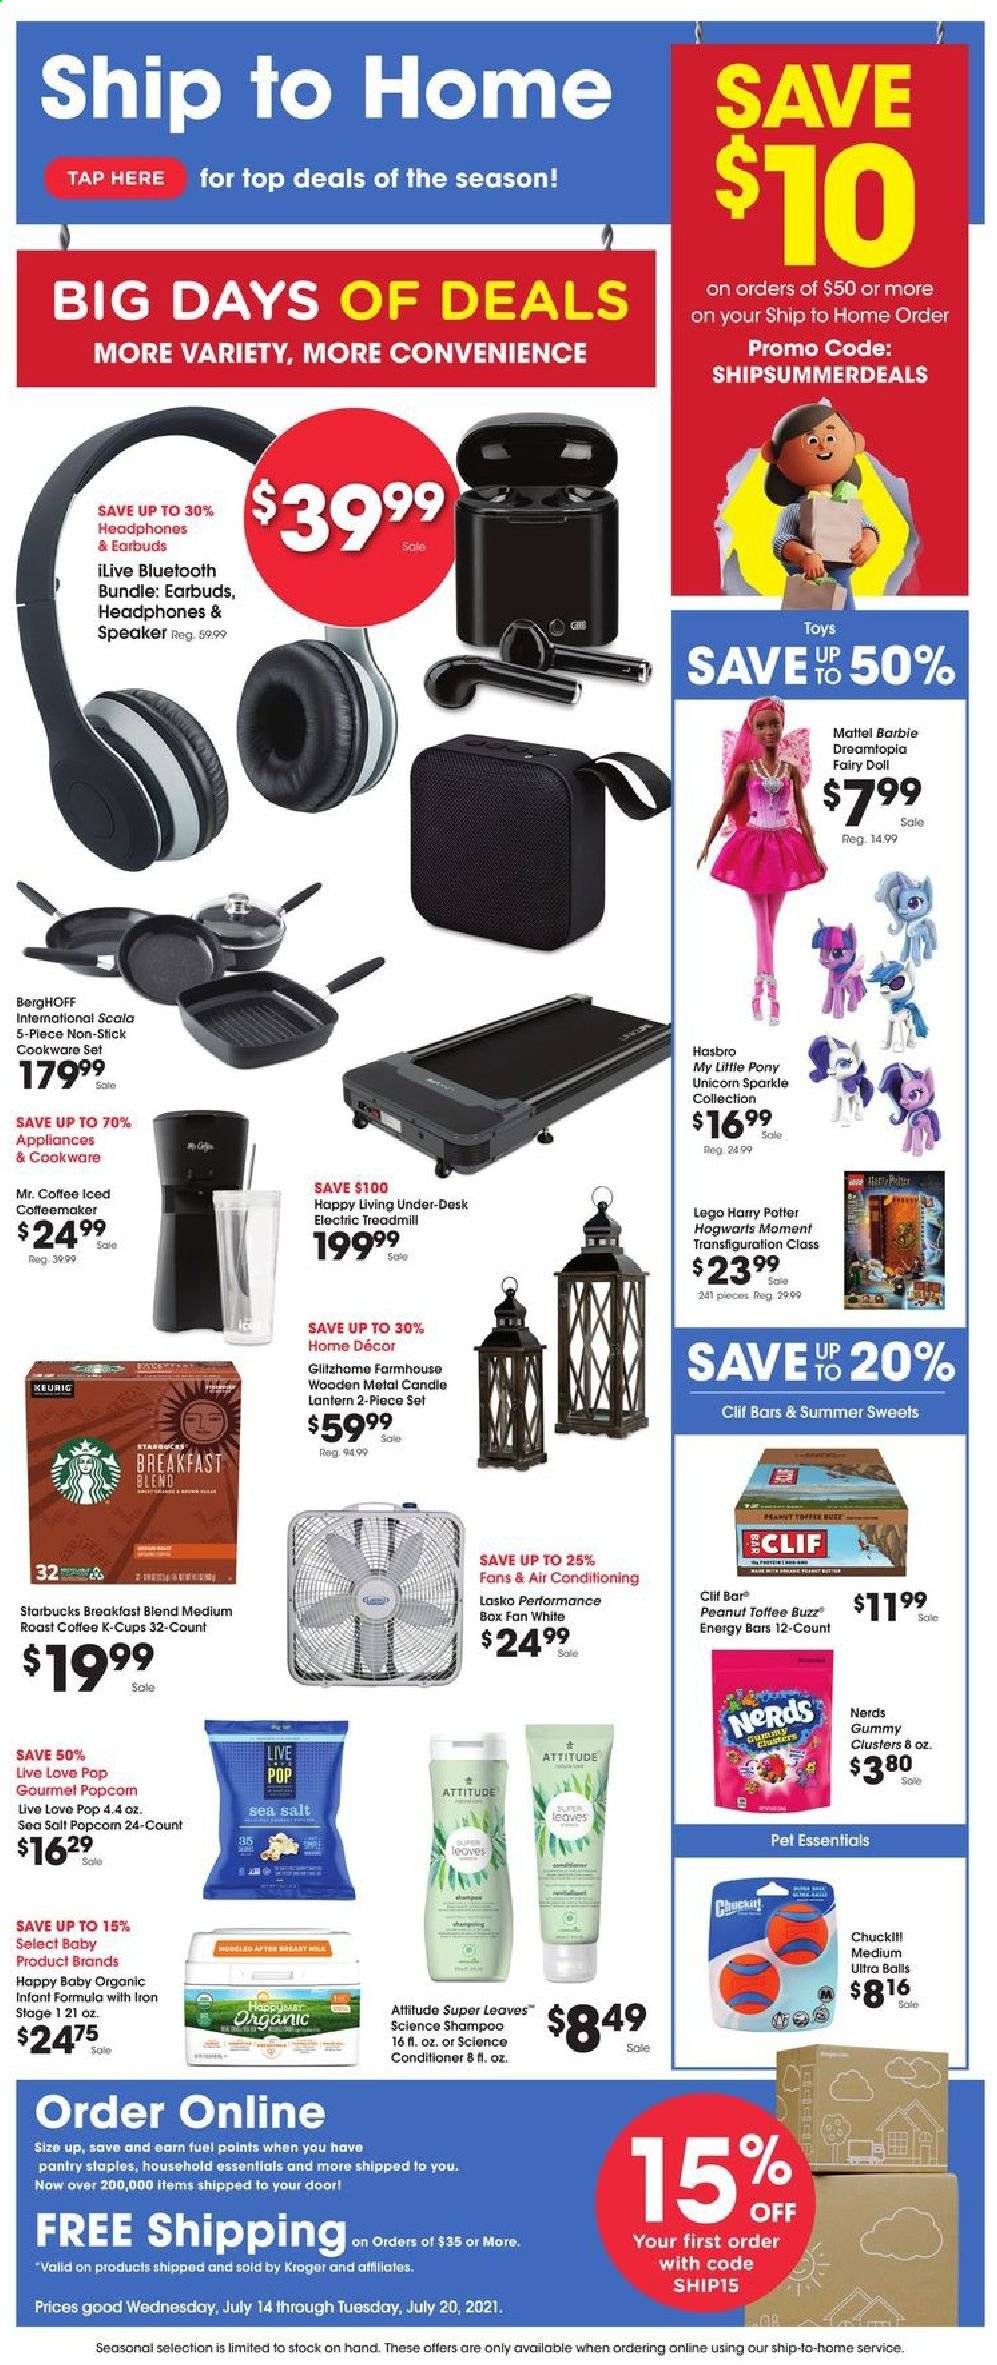 thumbnail - QFC Flyer - 07/14/2021 - 07/20/2021 - Sales products - toffee, sea salt, energy bar, coffee, Starbucks, coffee capsules, K-Cups, Keurig, breakfast blend, Fairy, shampoo, conditioner, Barbie, cookware set, Harry Potter, Hogwarts, candle, speaker, headphones, earbuds, wall fan, iron, doll, LEGO, LEGO Harry Potter, Mattel, My Little Pony, Hasbro, toys, lantern. Page 1.